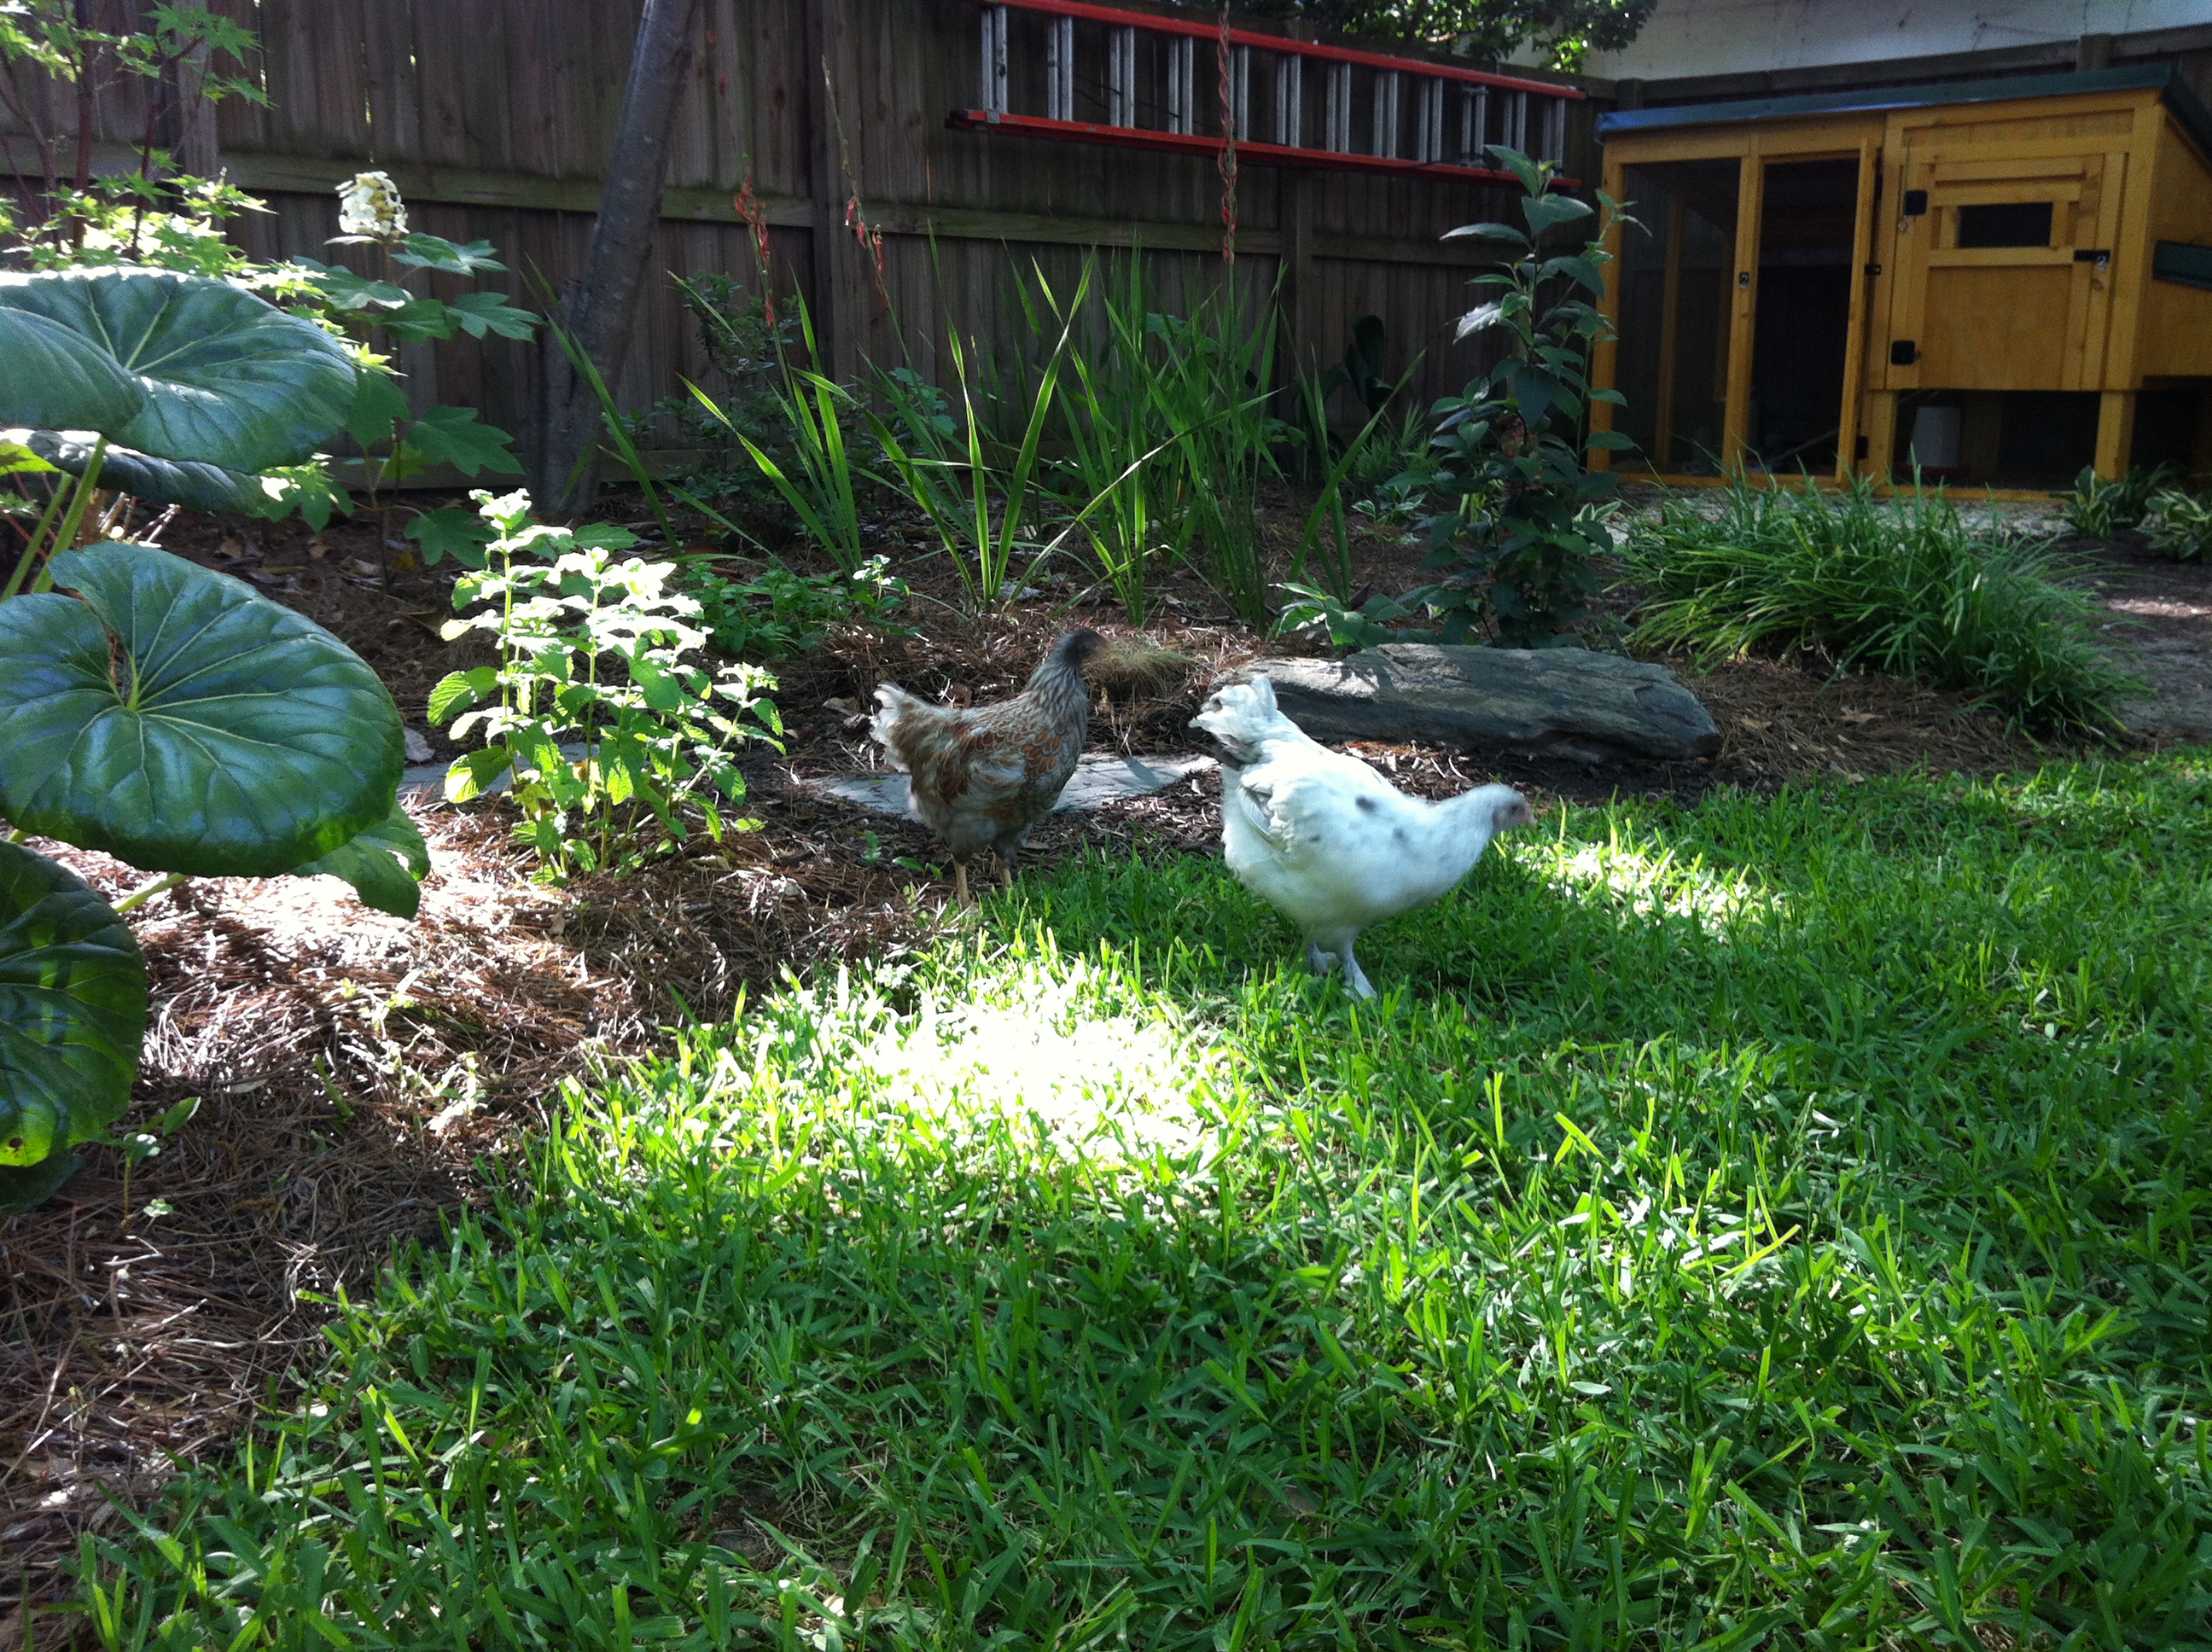 Mabel and Pearl helping with the landscaping.